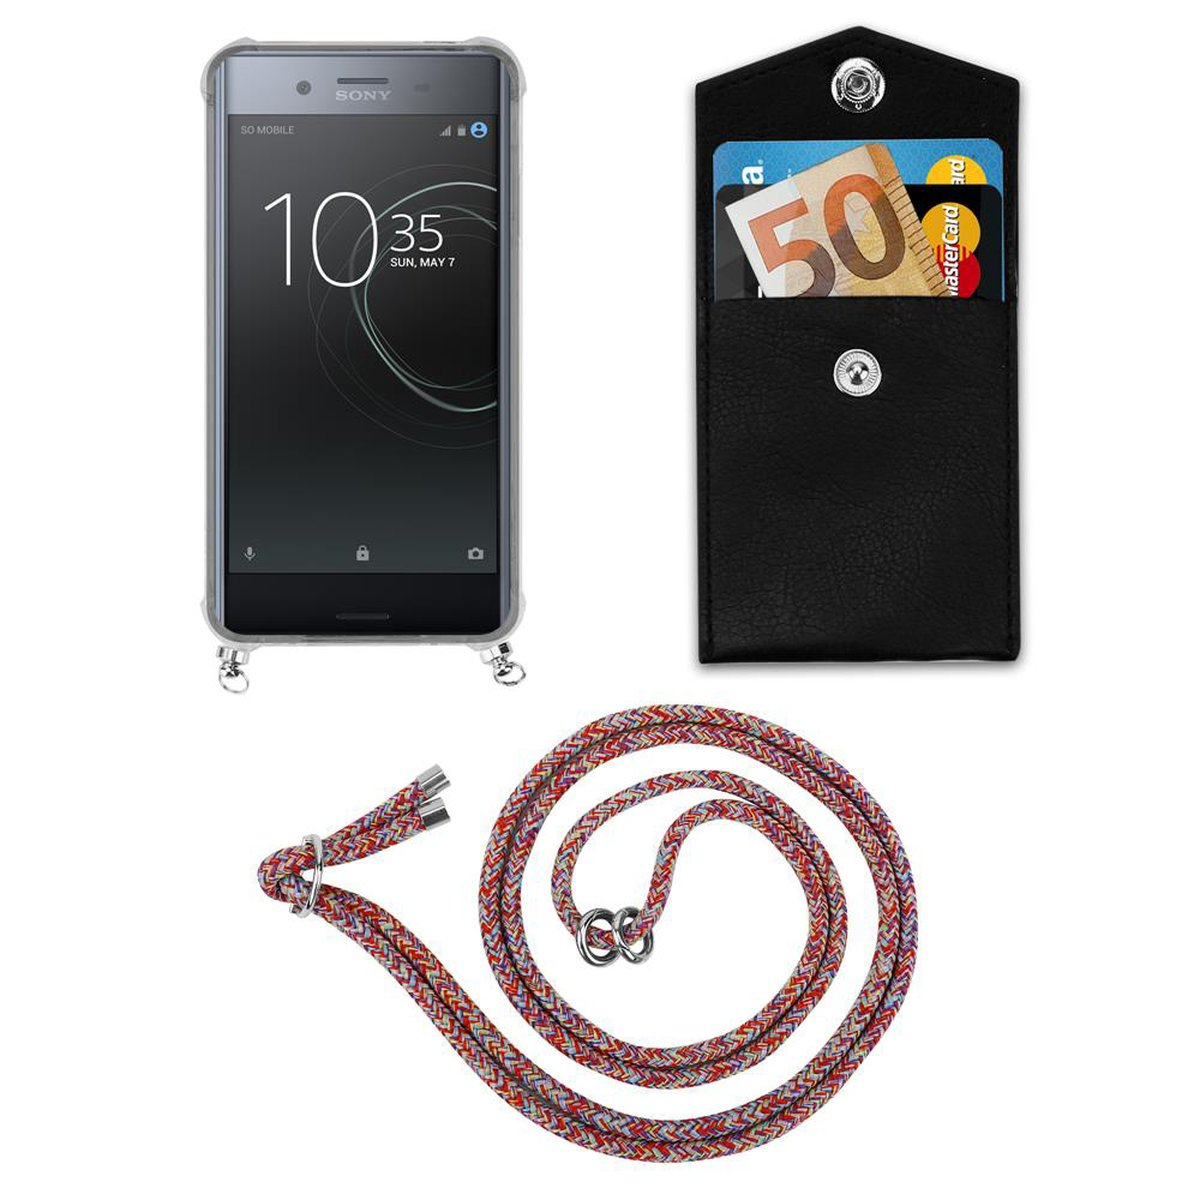 und Band PARROT / mit Backcover, Ringen, COLORFUL Sony, abnehmbarer XZs, Handy XZ Hülle, Silber Xperia CADORABO Kette Kordel